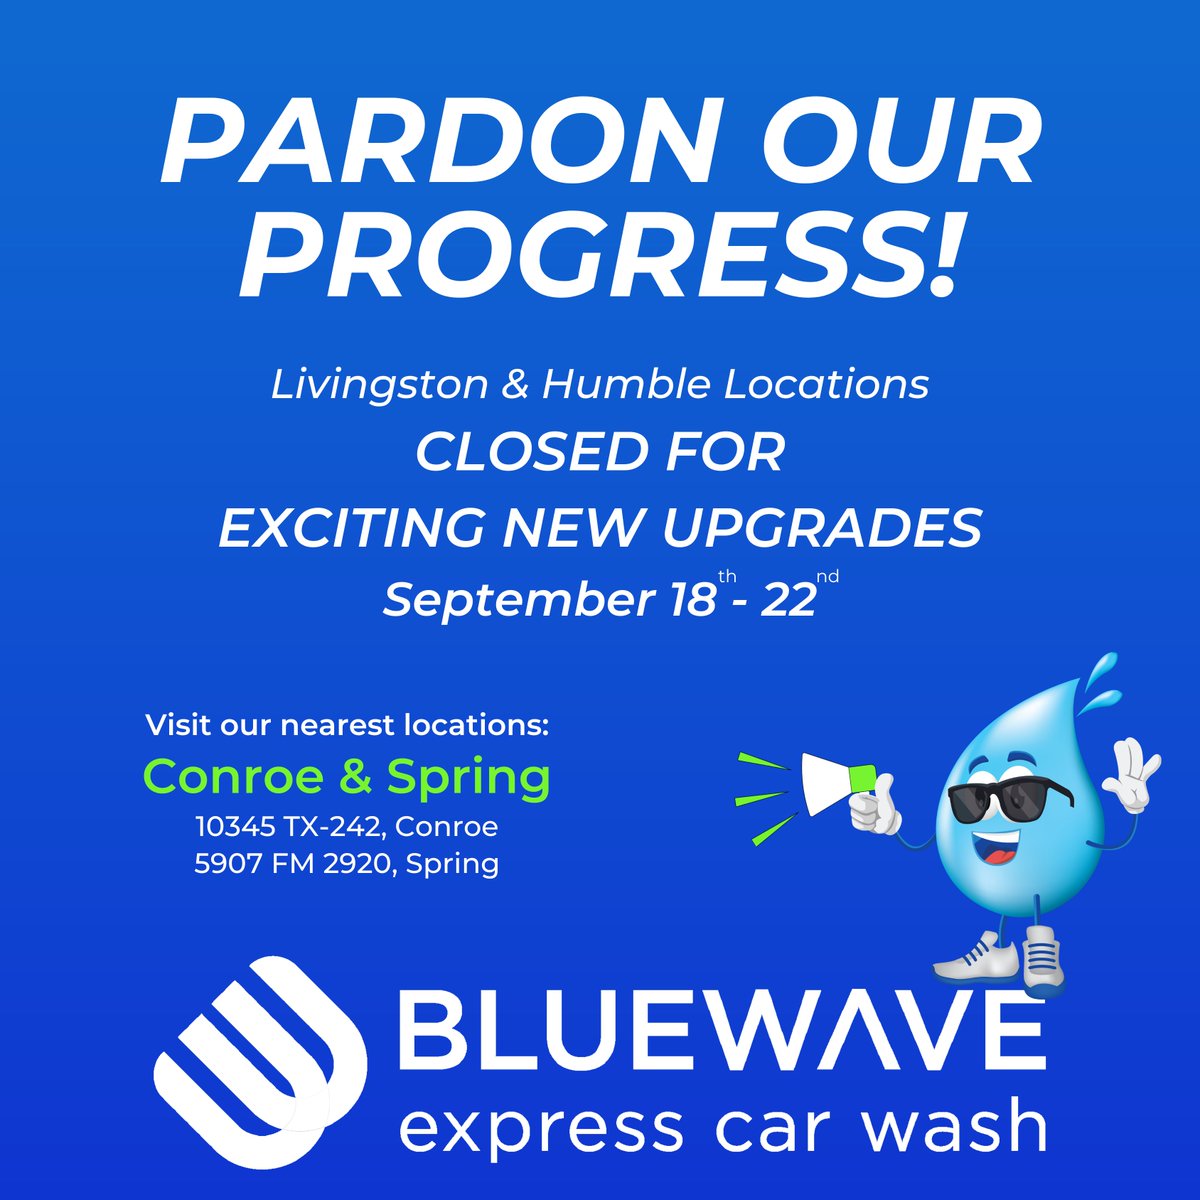 📢 Our Livingston and Humble locations are closed this week for exciting new upgrades! We will be bringing you a better wash experience with more amenities. 🙌

Please visit one of our nearest locations to continue washing without interruptions. Thank you for your understanding!